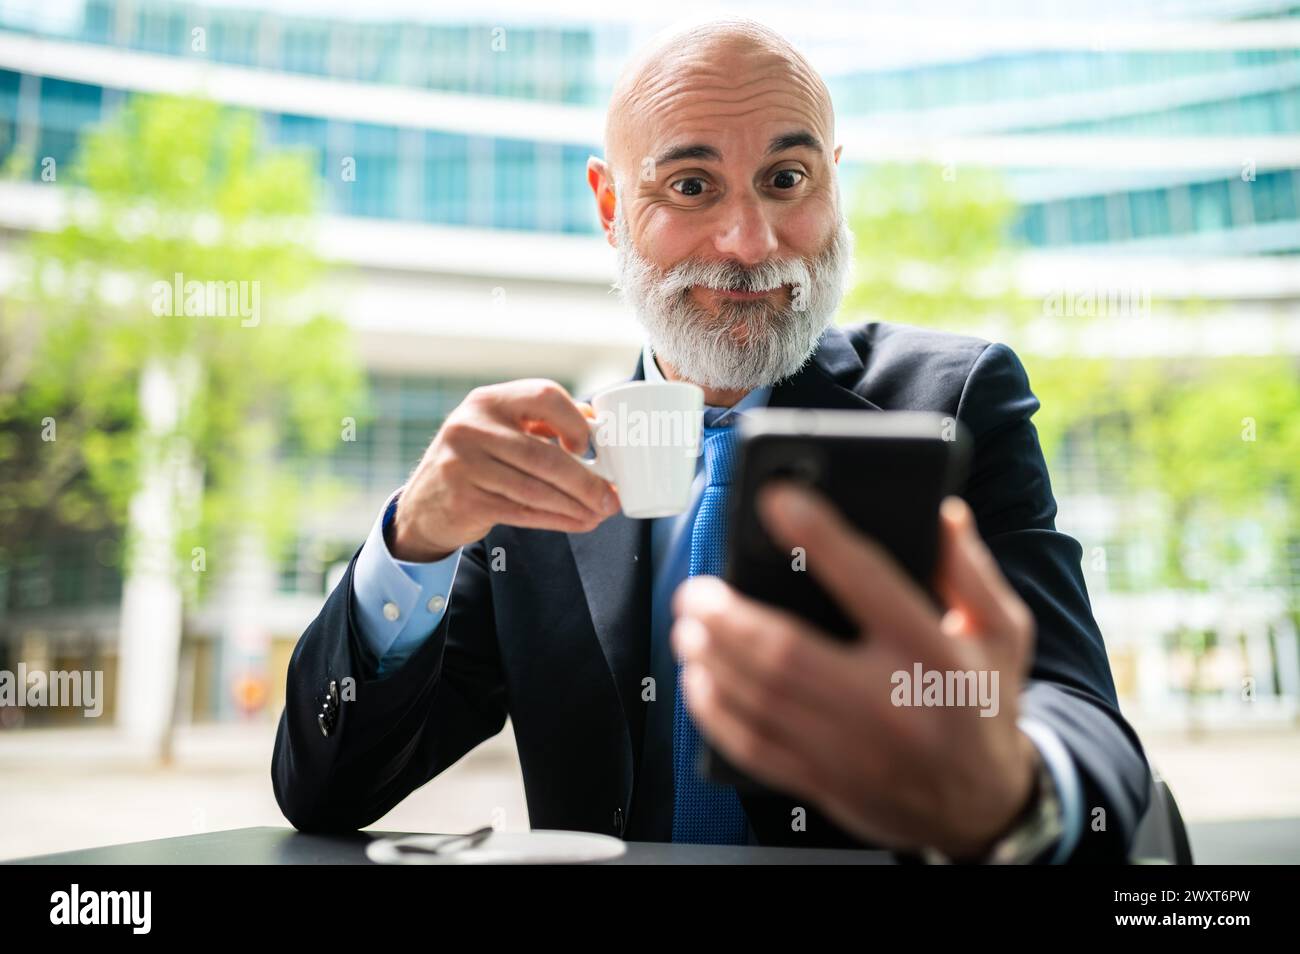 Senior stylish bald manager with white beard having a coffee outdoor while using his smartphone with a shocked expression Stock Photo